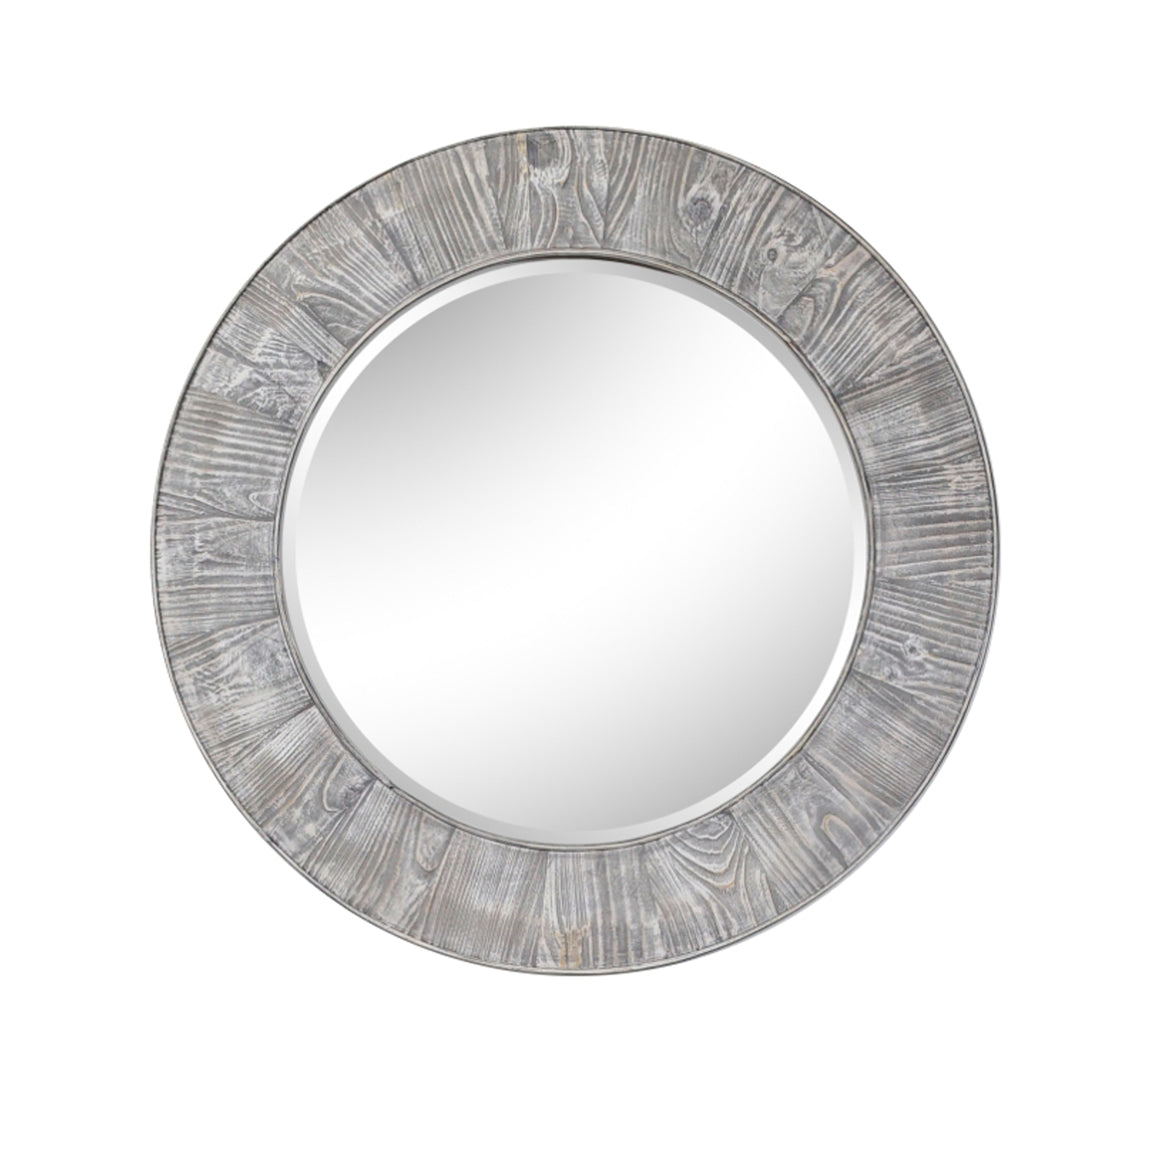 27.5" RUSTIC SOLID FIR MIRROR IN GREY DRIFTWOOD(ROUND)